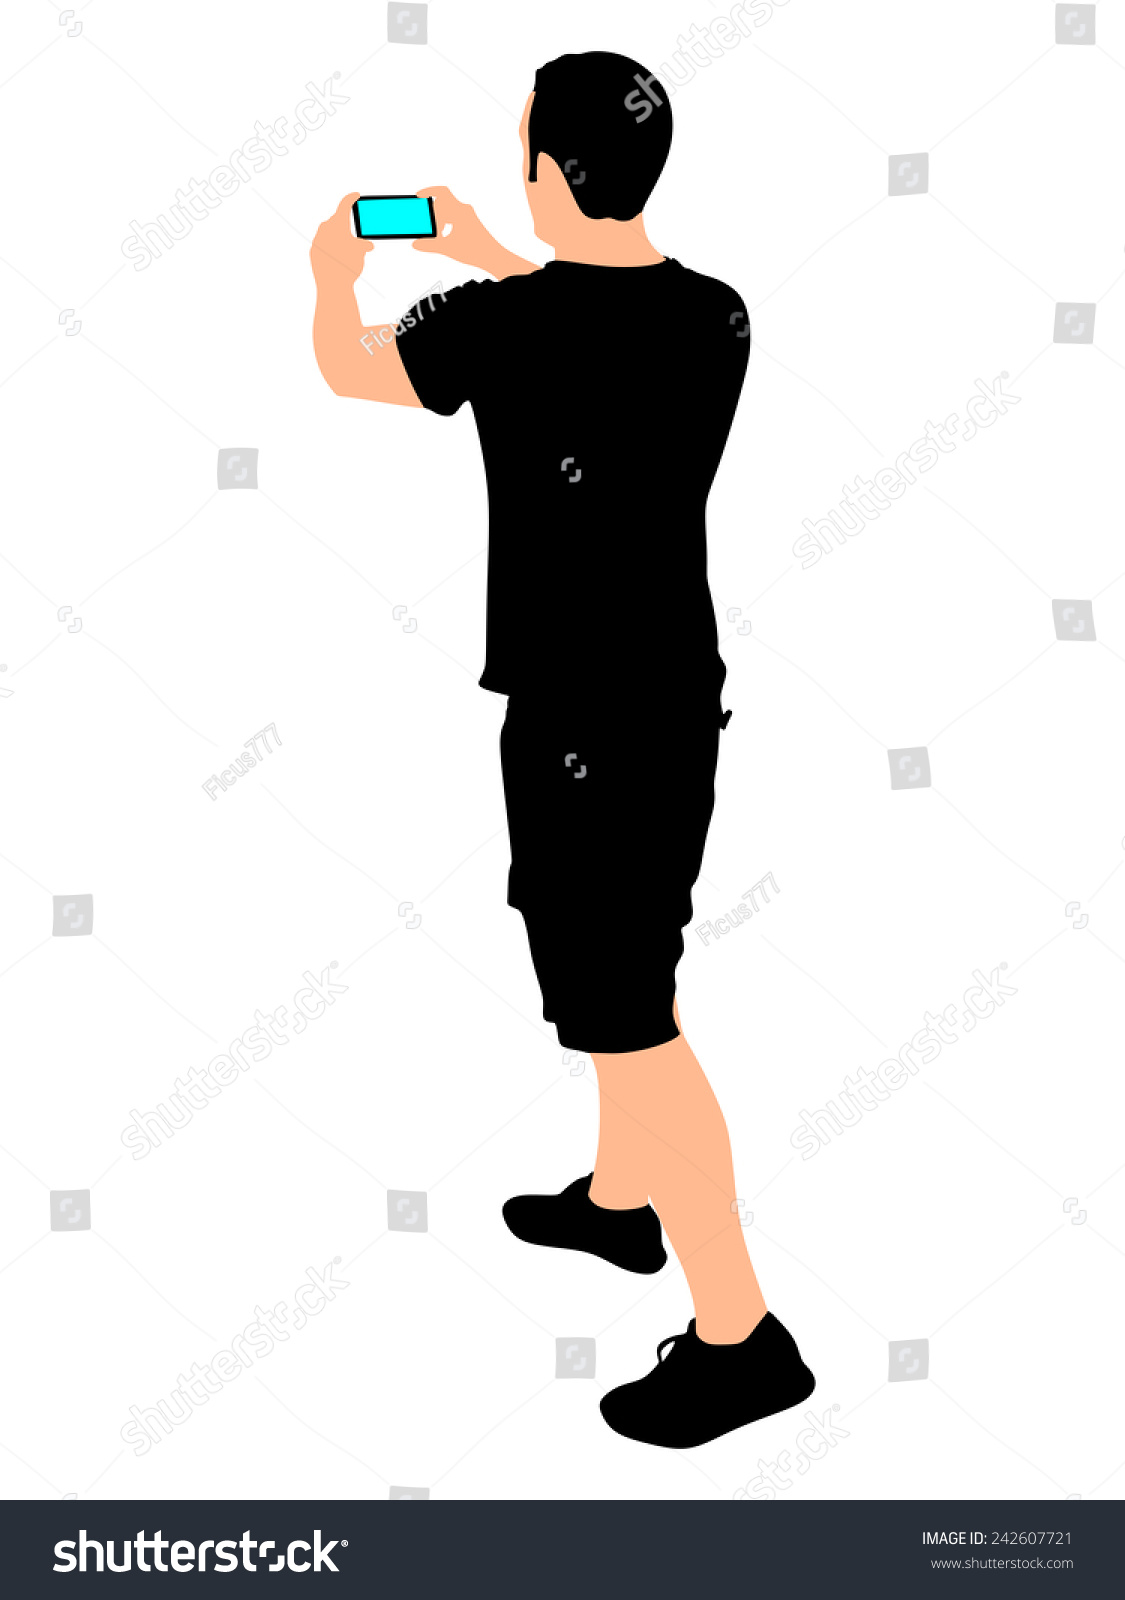 Man Taking Pictures With His Smartphone, Vector - 242607721 : Shutterstock